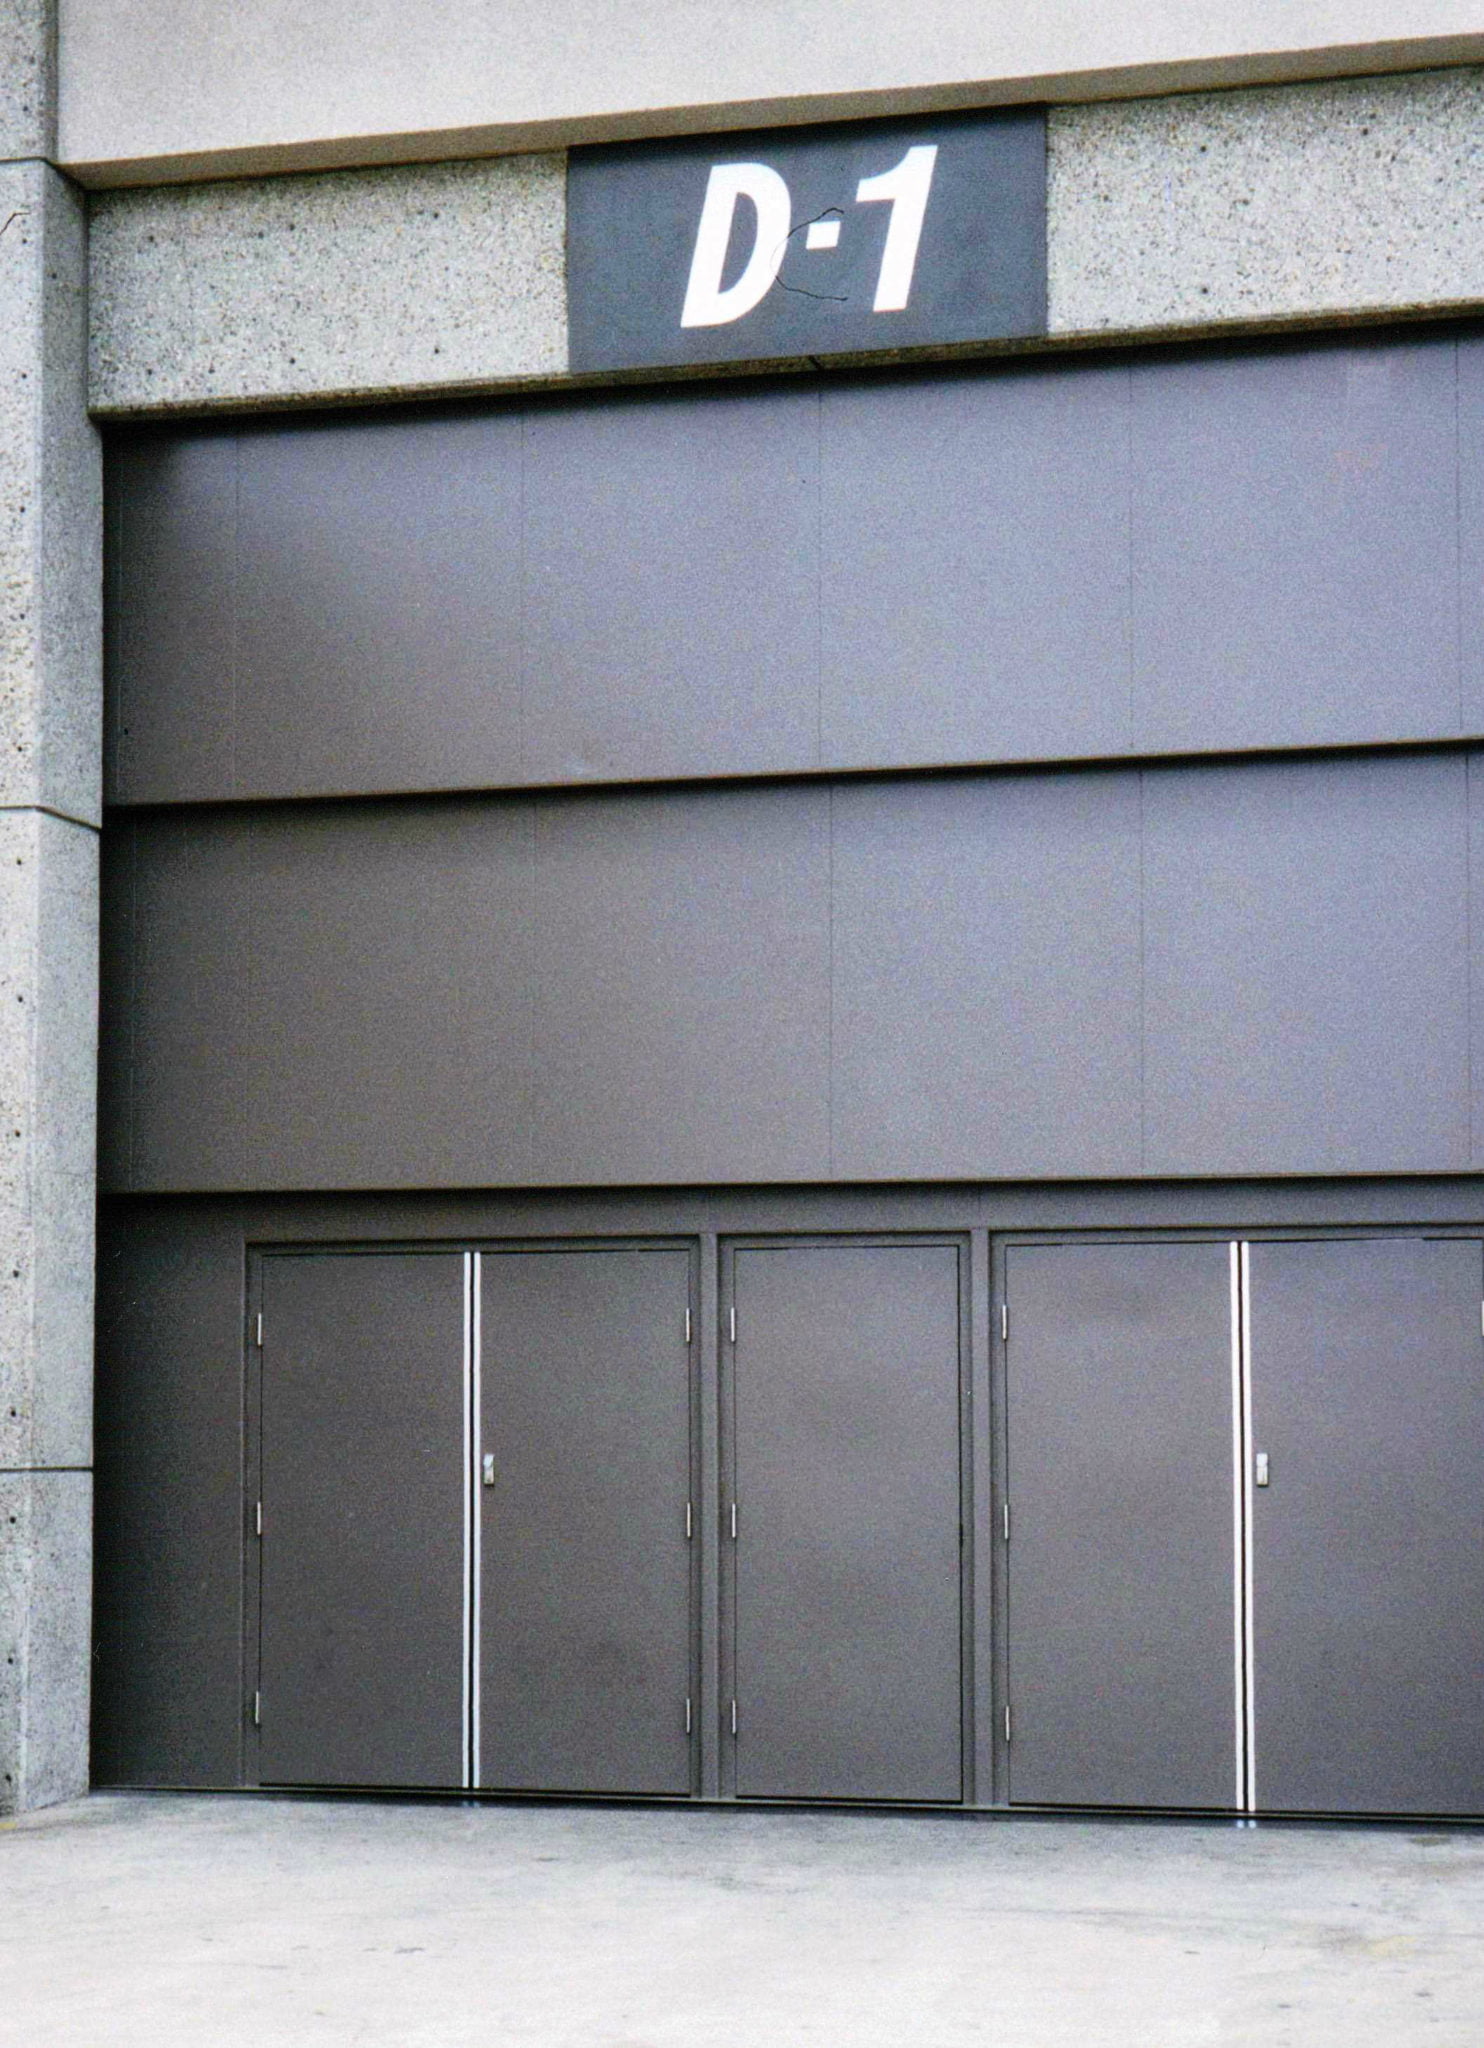 Vertical Lift Door with Mandoors on the Anaheim Convention Center